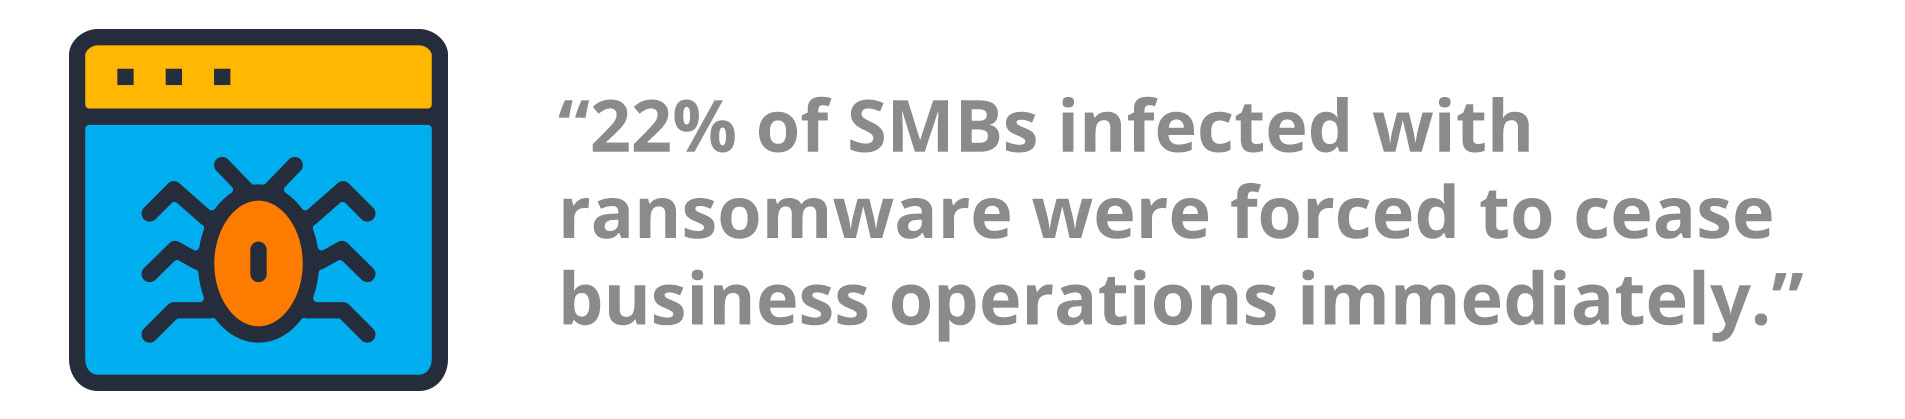 22% of SMBs infected with ransomware were forced to cease business operations immediately.